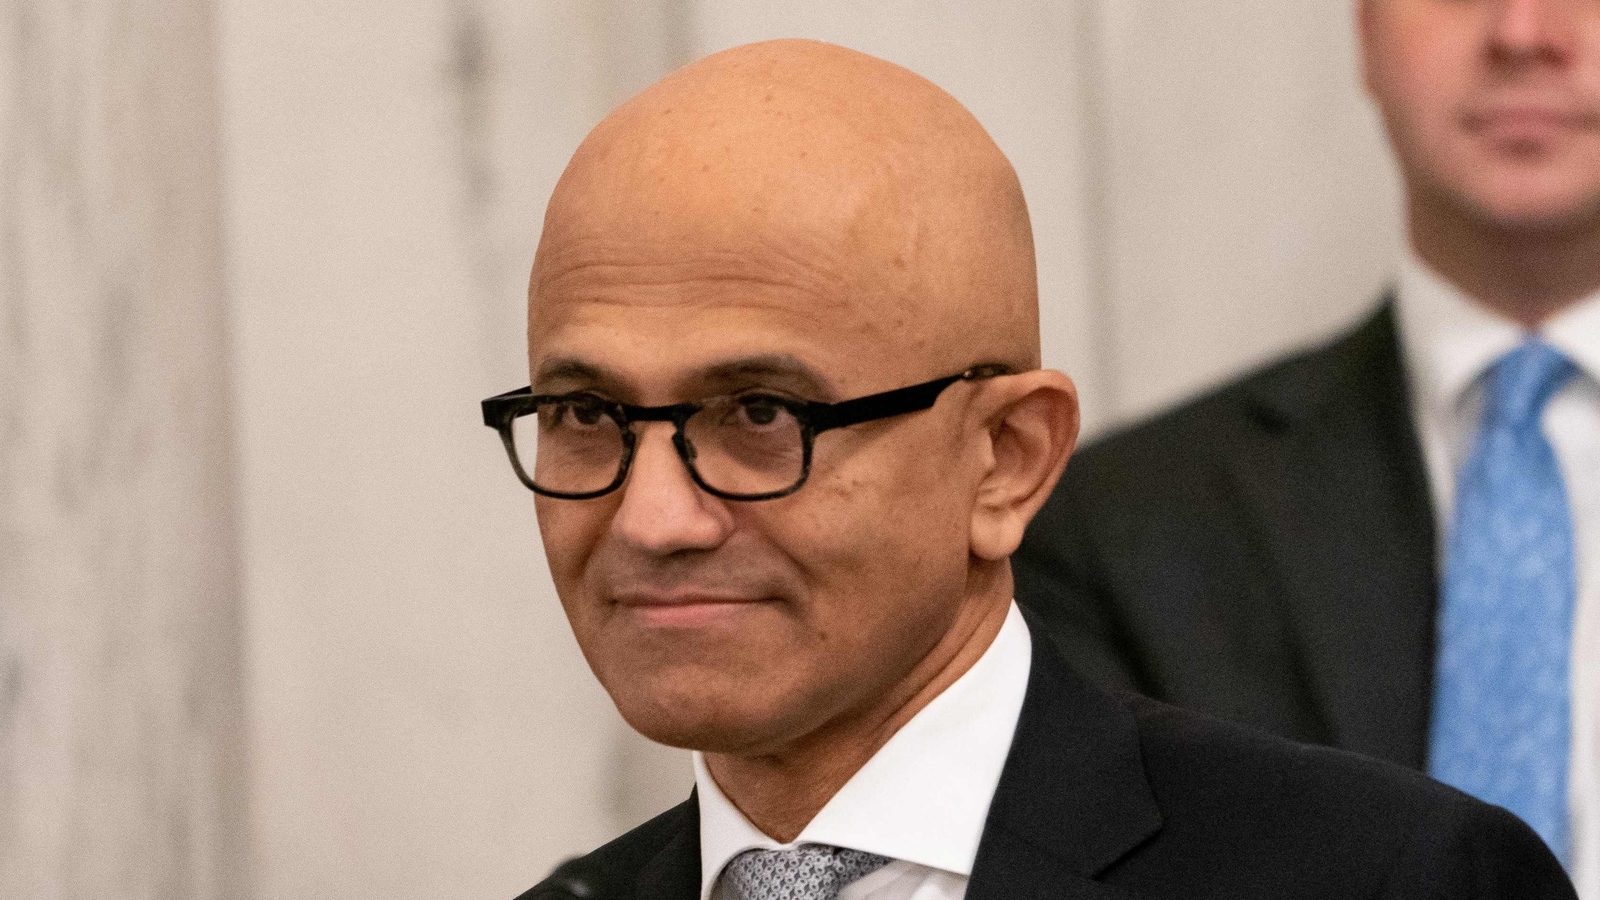 Microsoft shares up 8.3% as AI features give a boost to sales, Microsoft